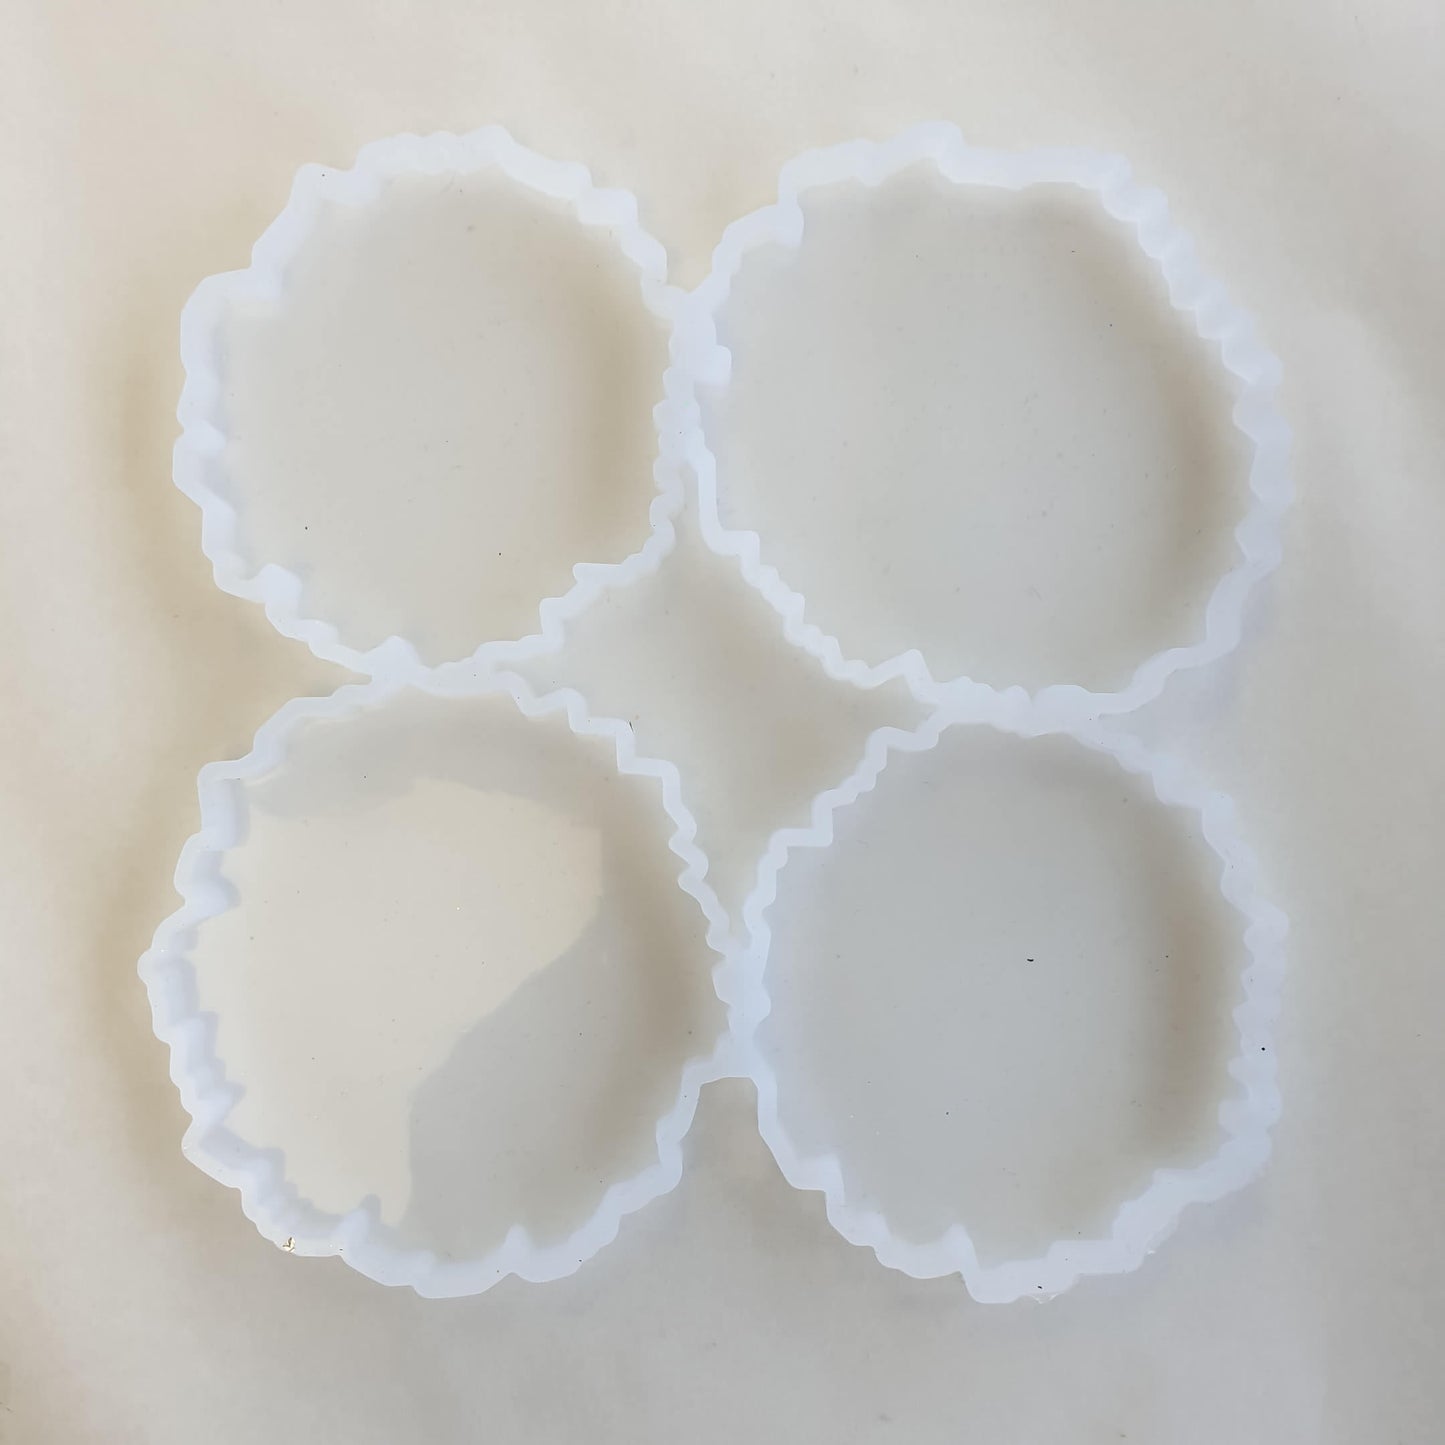 Silicone Mould for Resin Crafts - Make 4 Agate Coasters